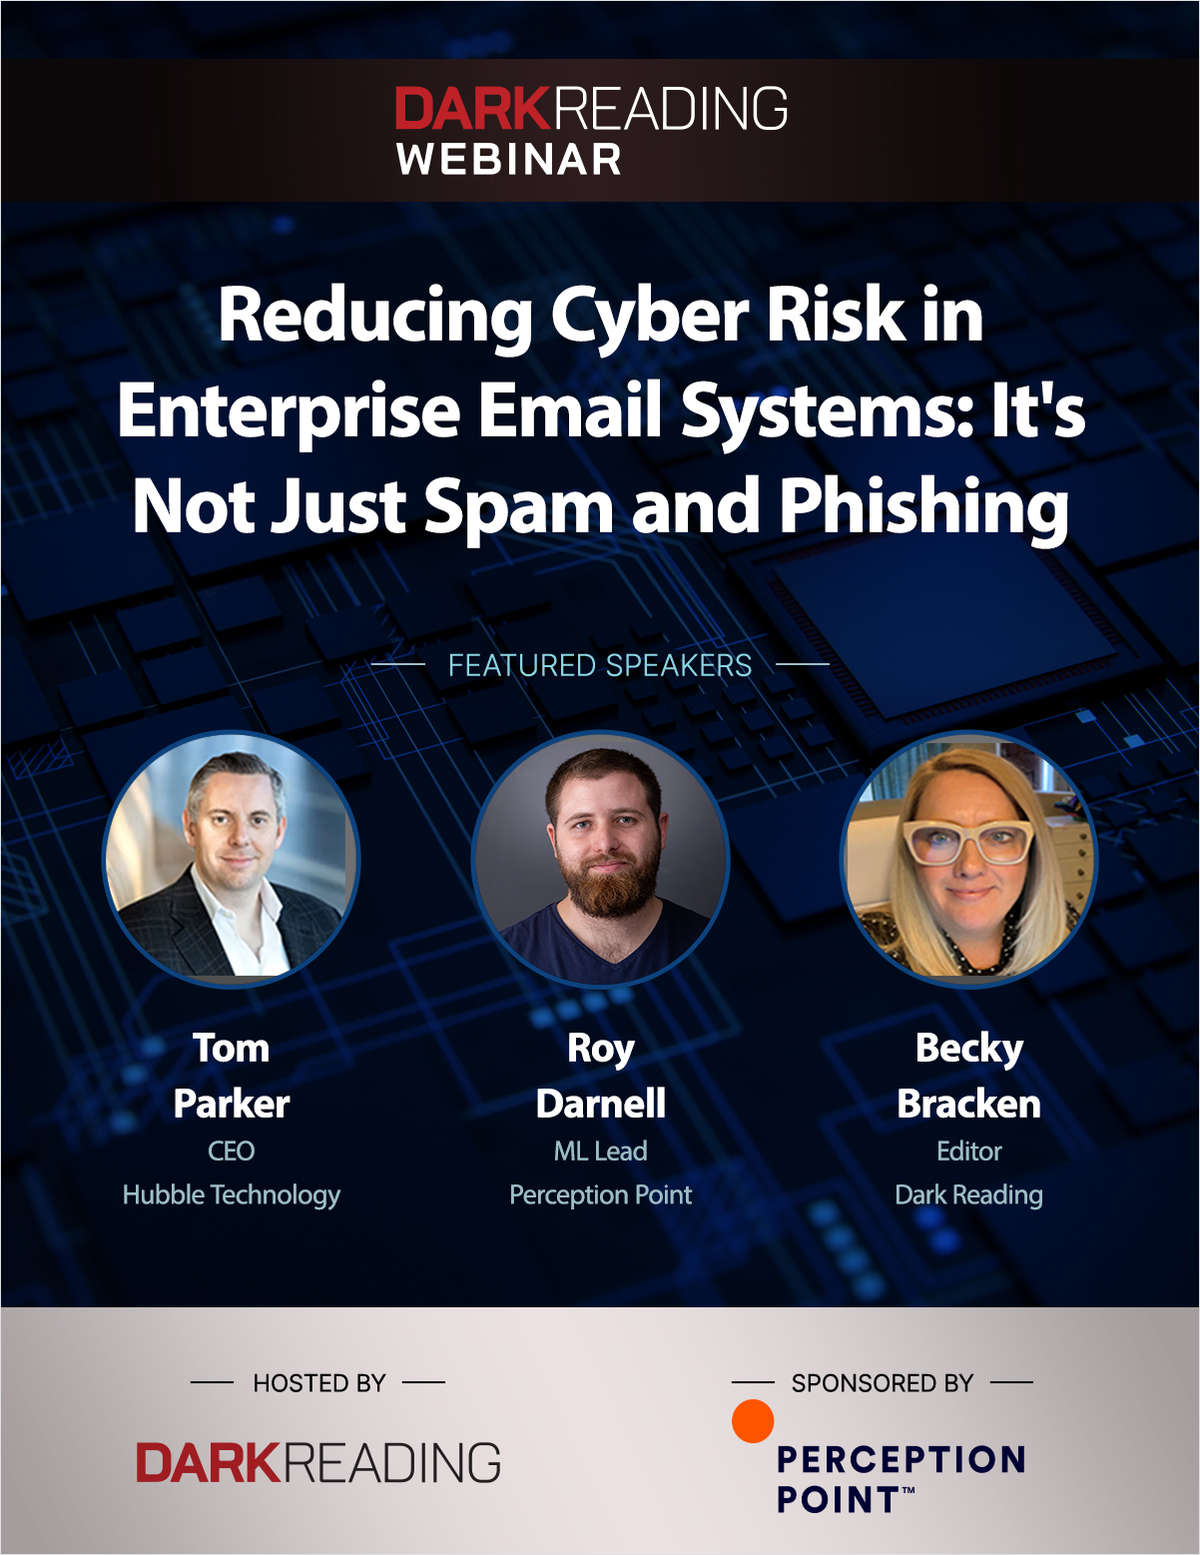 Reducing Cyber Risk in Enterprise Email Systems: It's Not Just Spam and Phishing